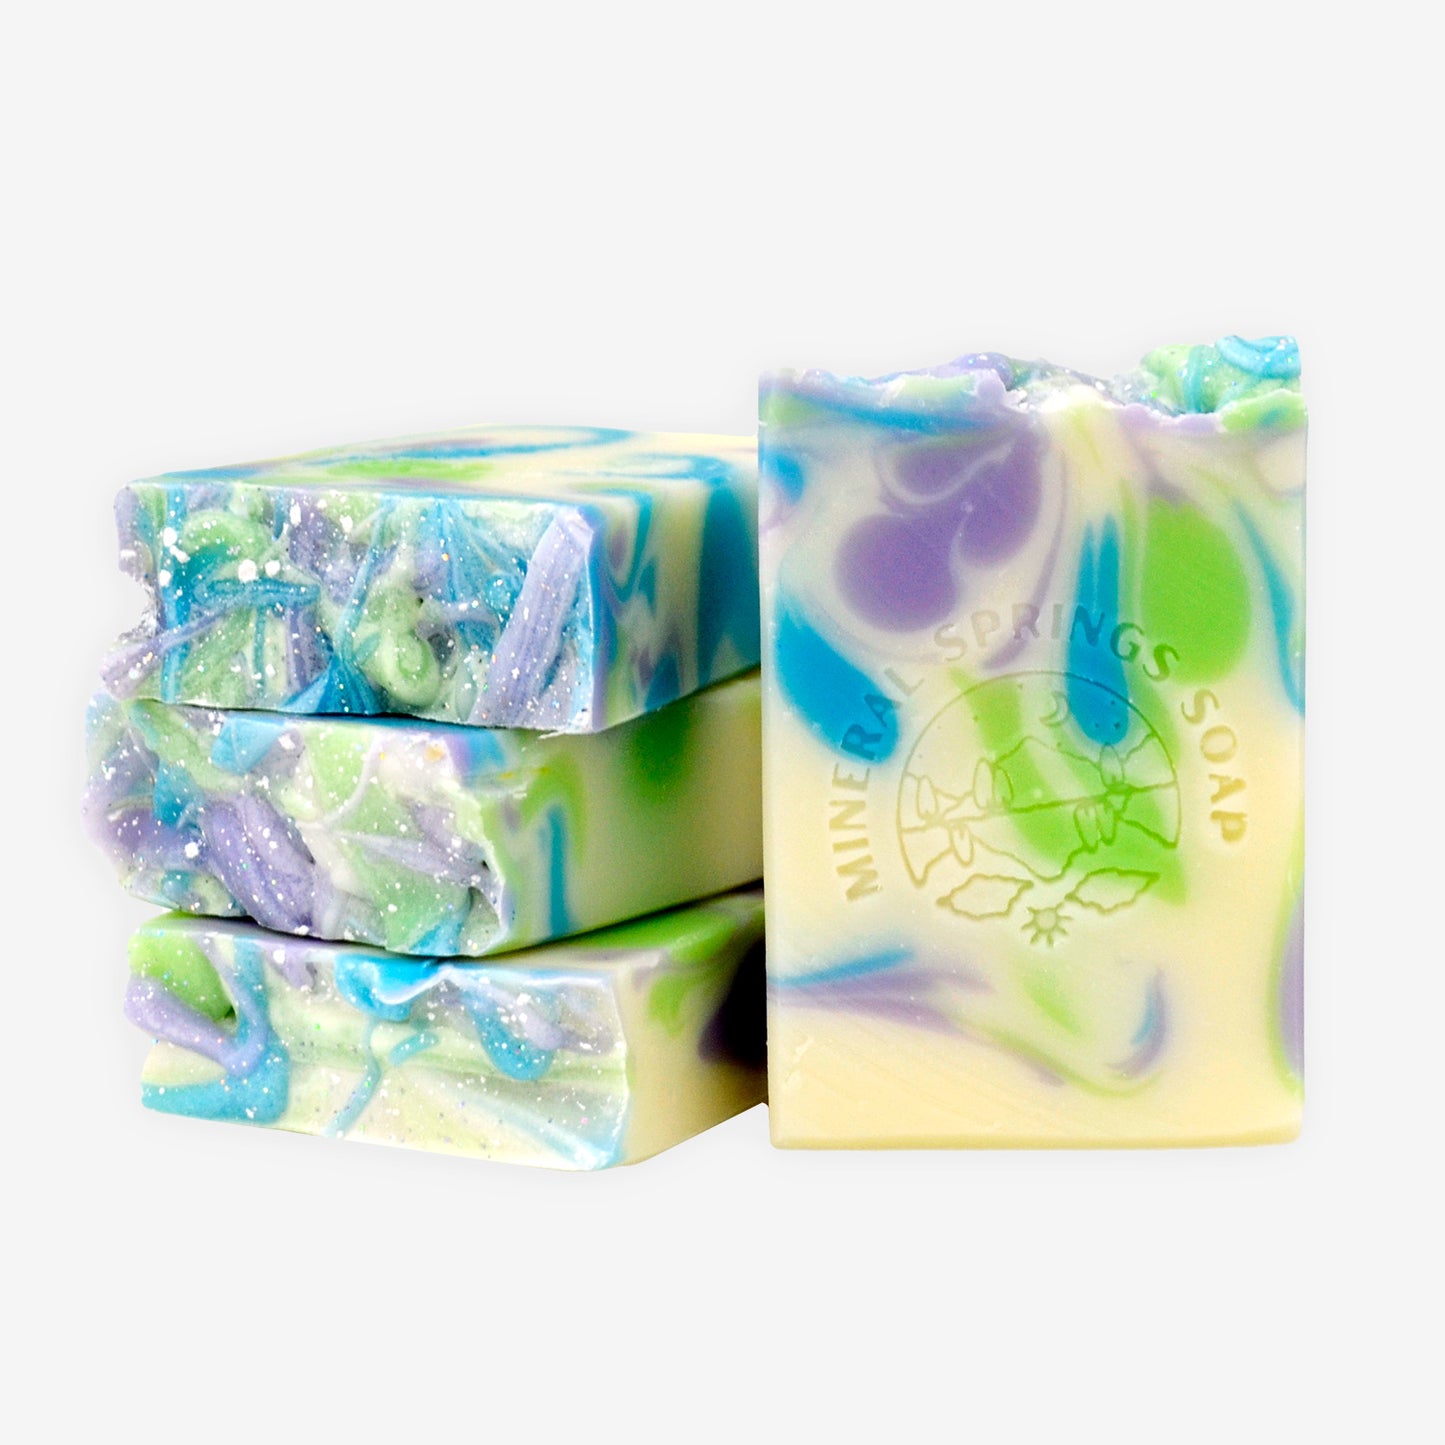 Clarity Rosemary Mint Handcrafted Soap